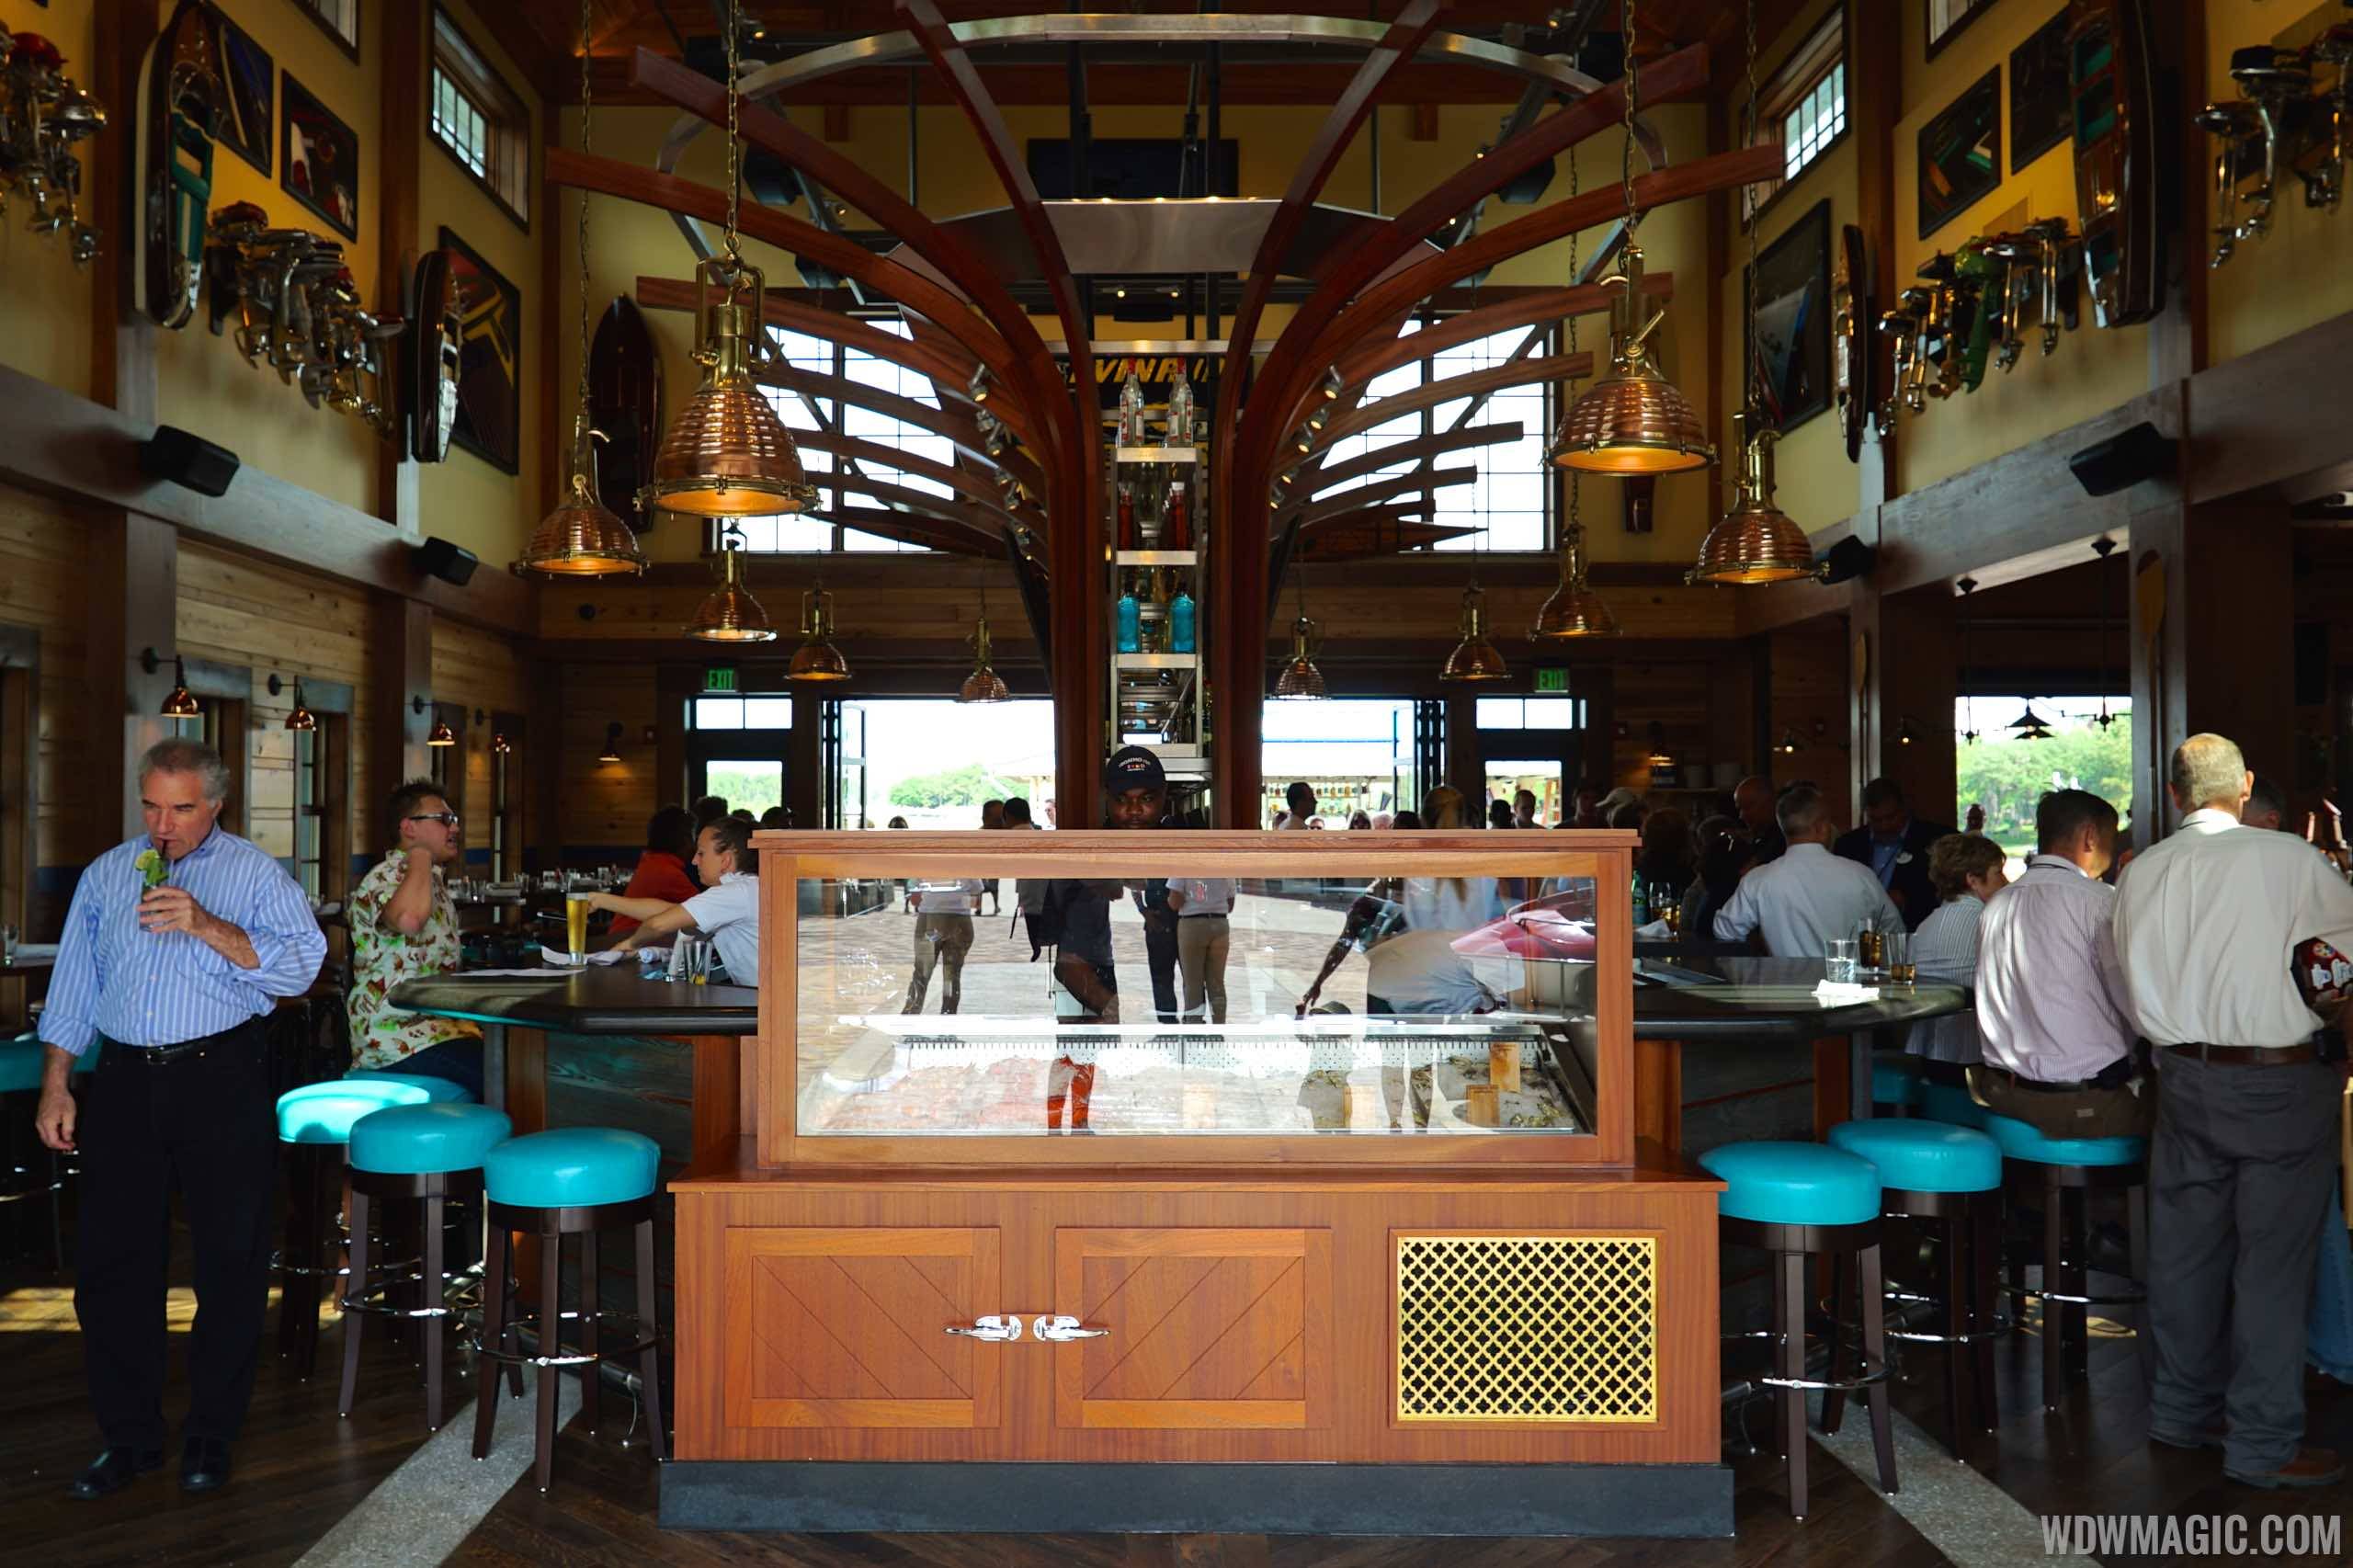 The BOATHOUSE - The Captains Raw Bar